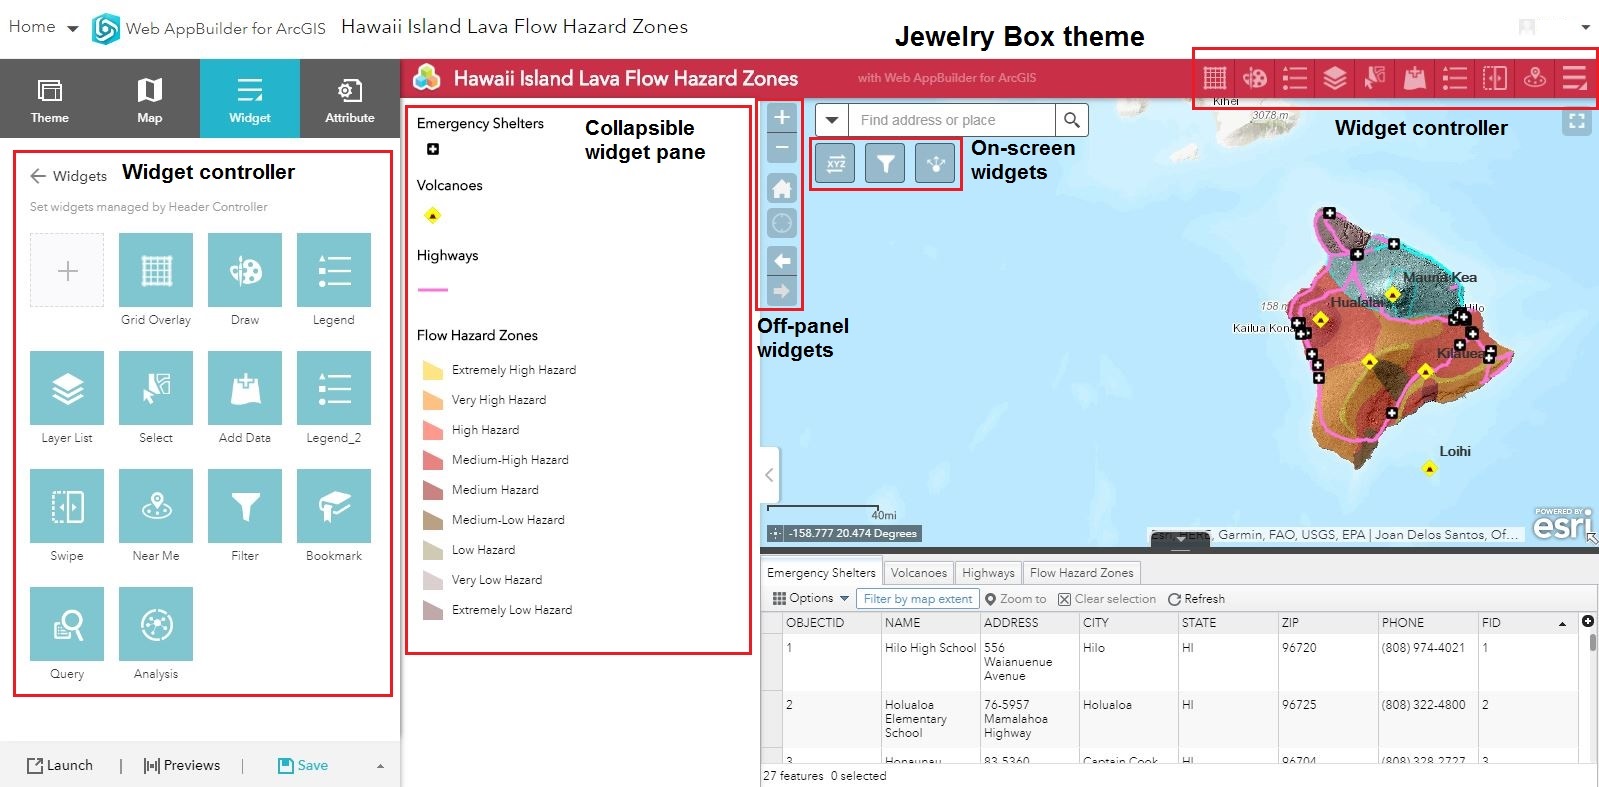 This is the Jewelry Box theme in Web AppBuilder for ArcGIS.